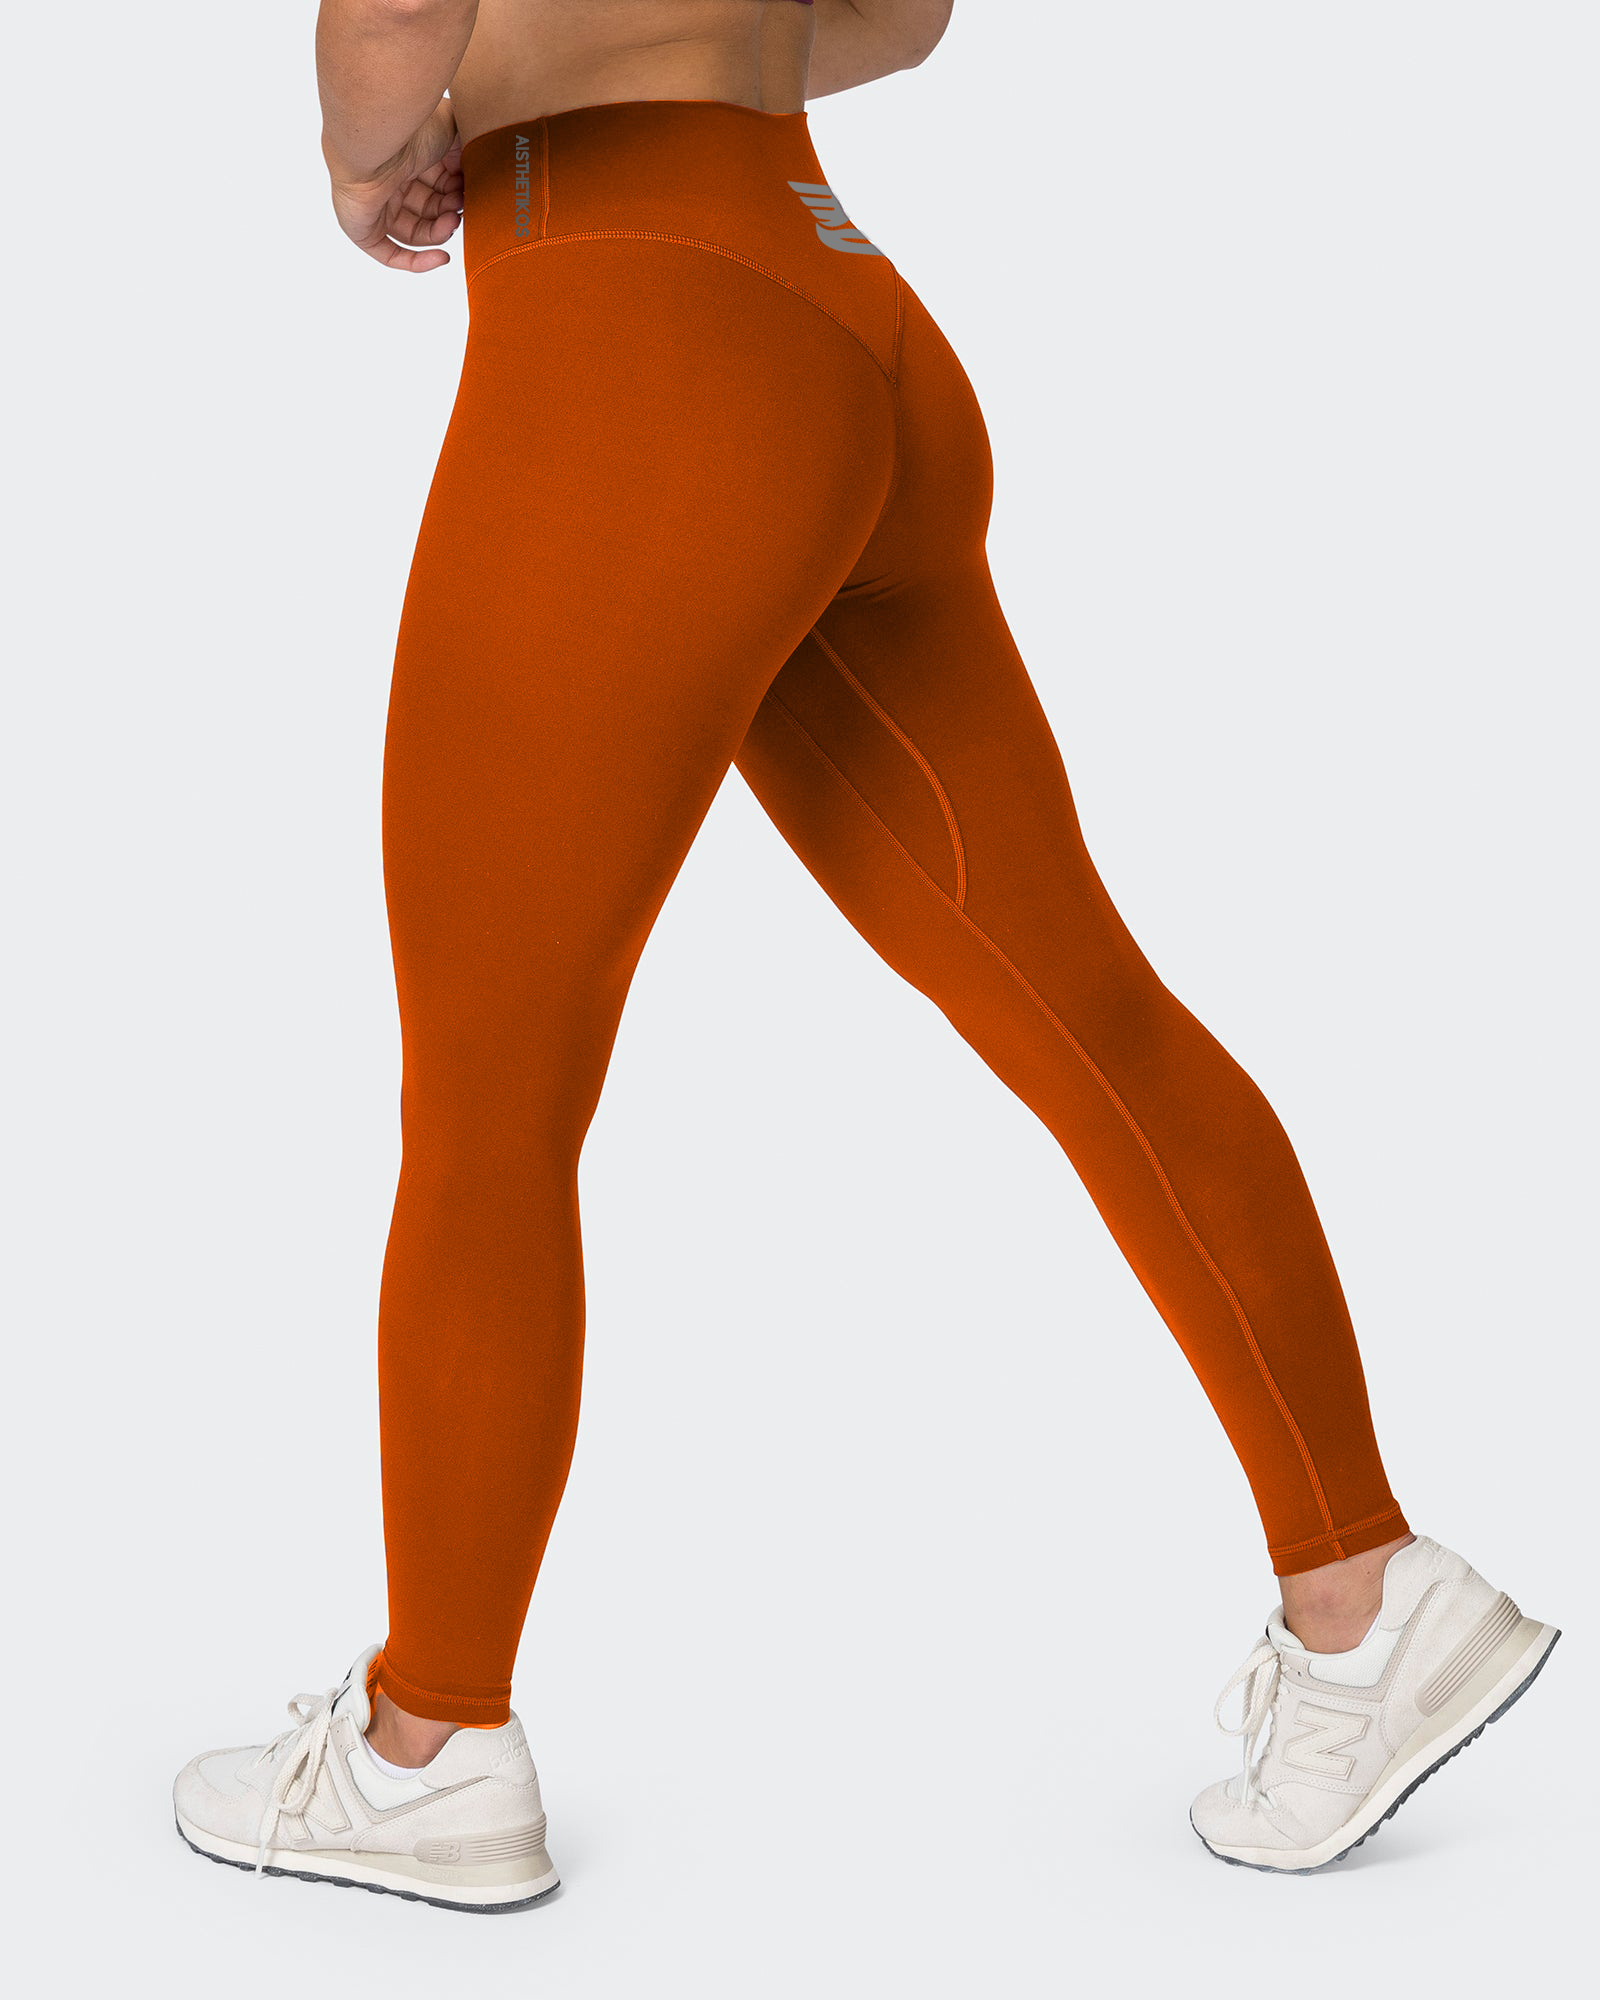 aastey Evergreen Full Length Leggings with 5 Pockets | Yoga & Gym Pants |  Strechable & High Waisted Leggings | Workout Tights | Activewear for Women